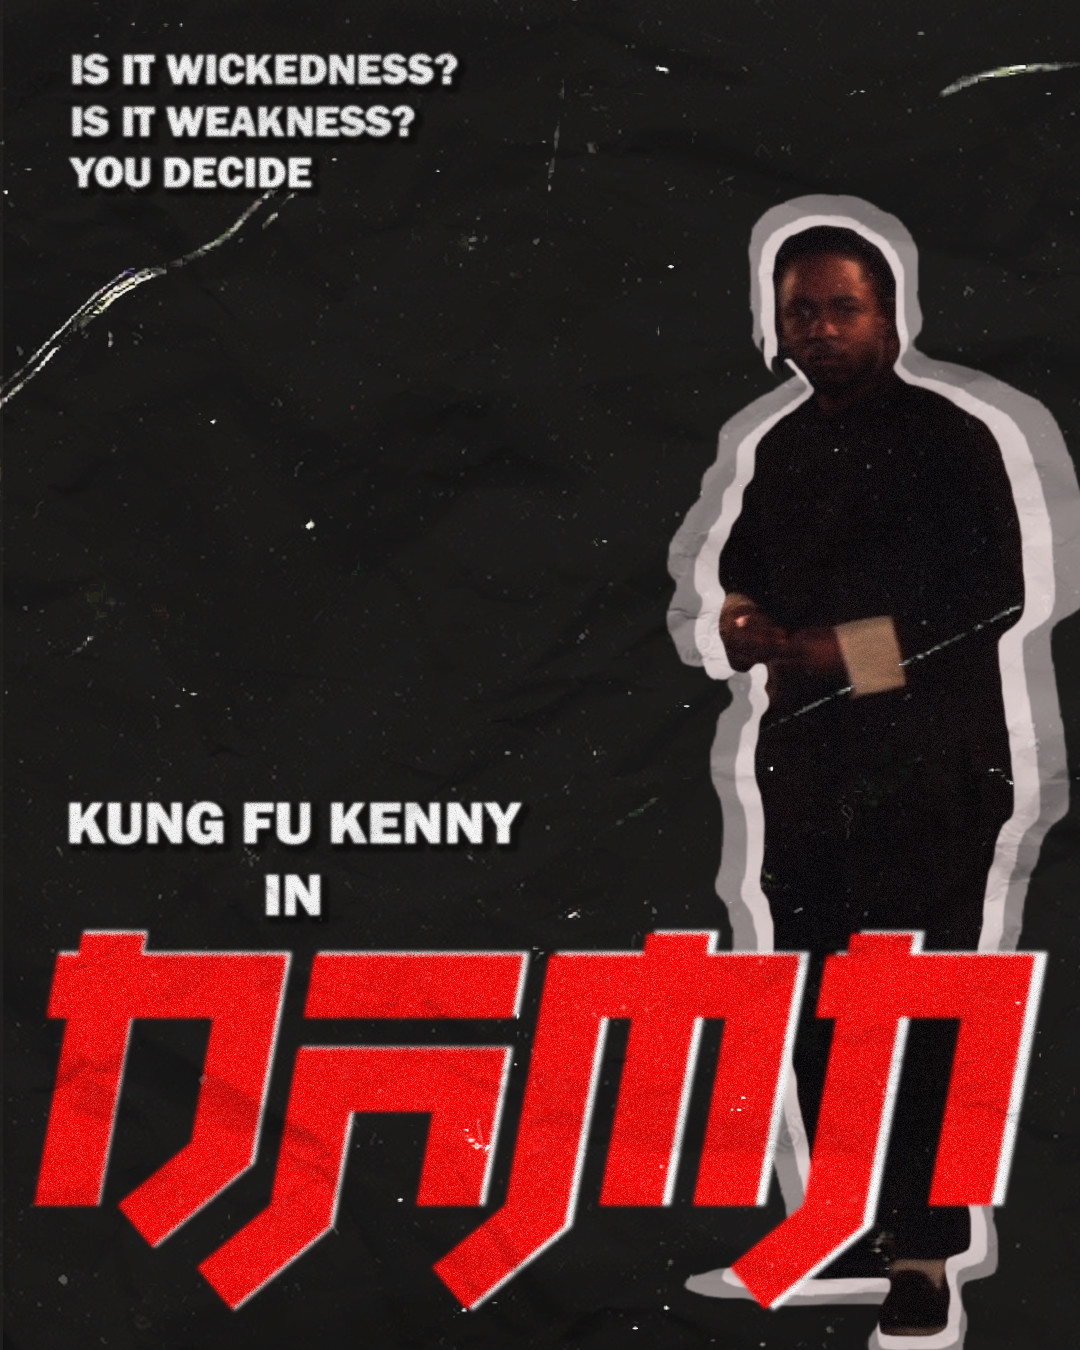 Promotional poster for the album DAMN (2017)